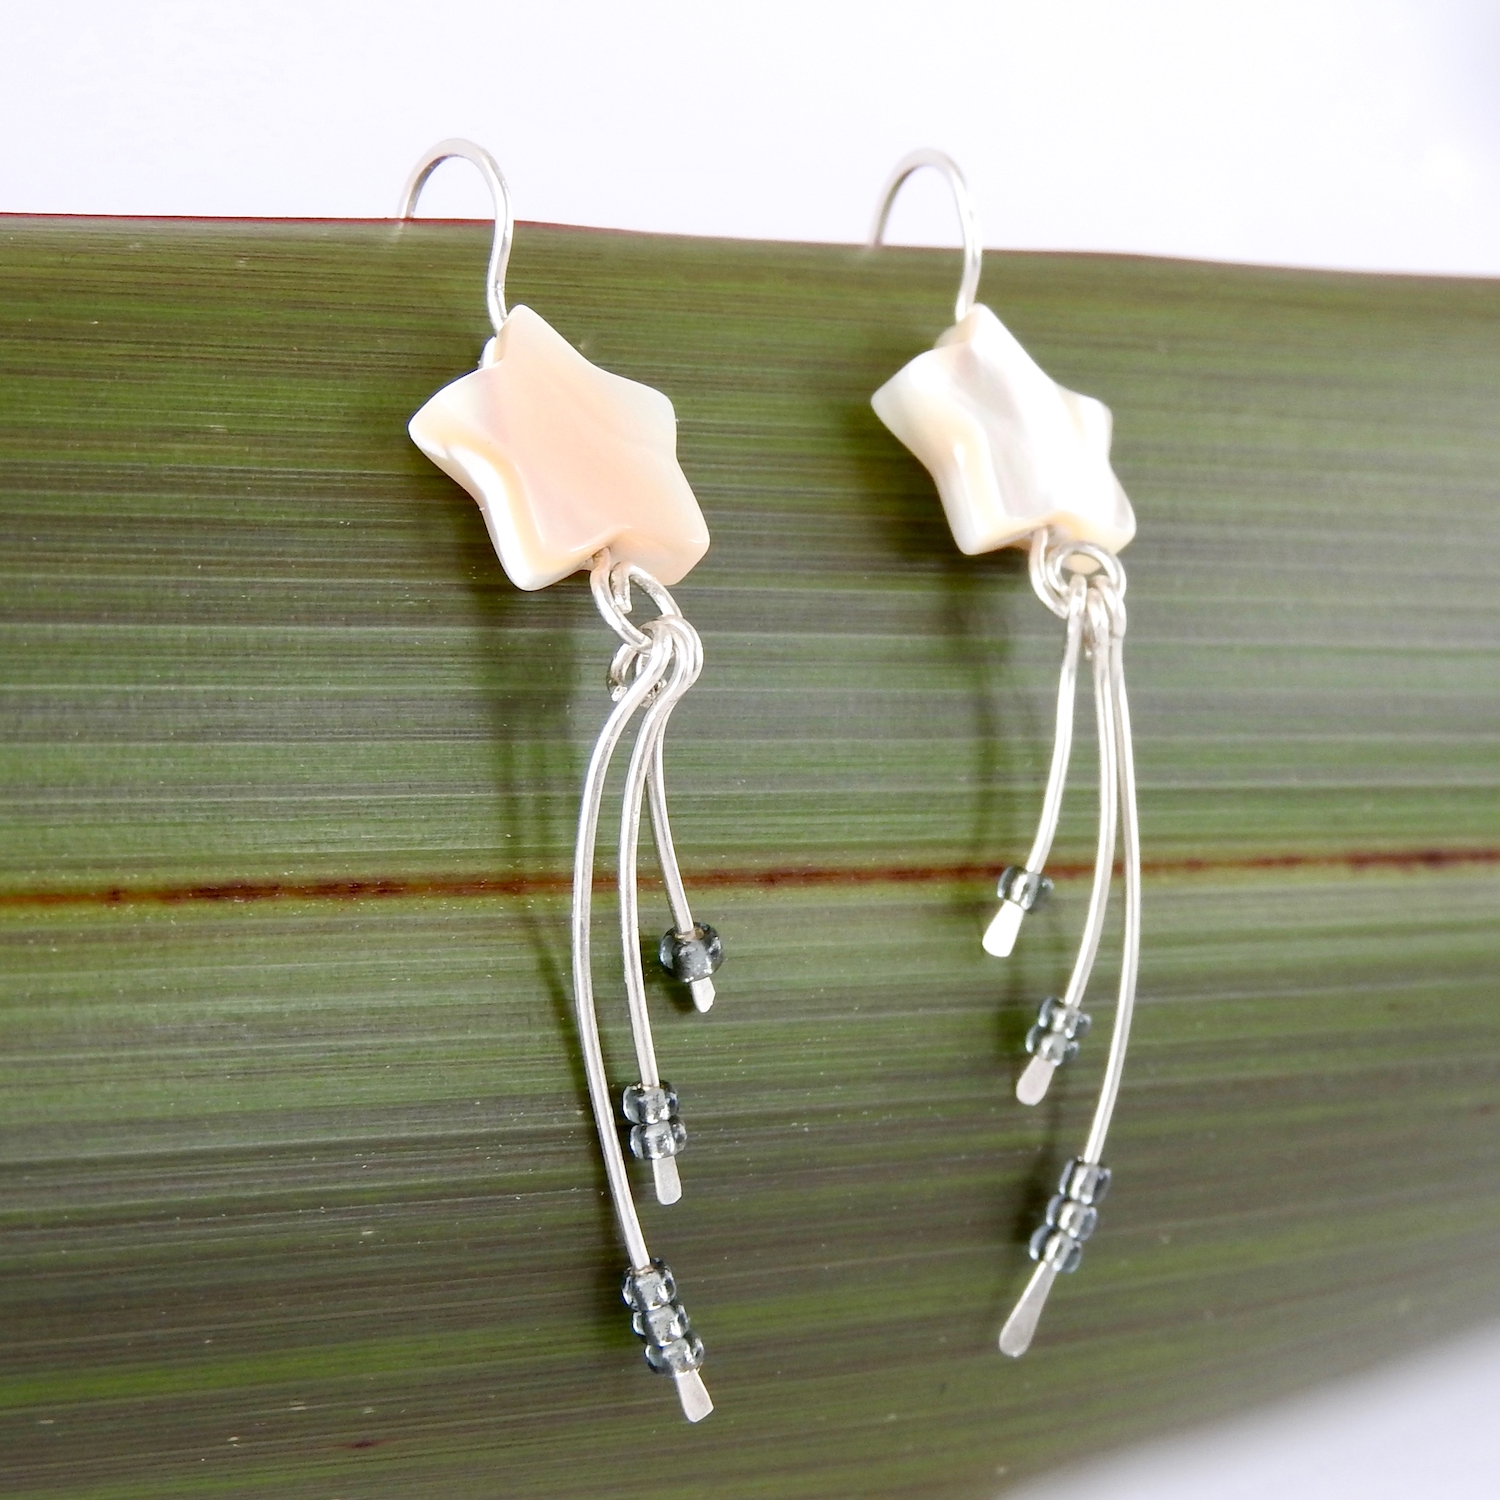 Side angle view of Wishing Star Earrings with three dangles